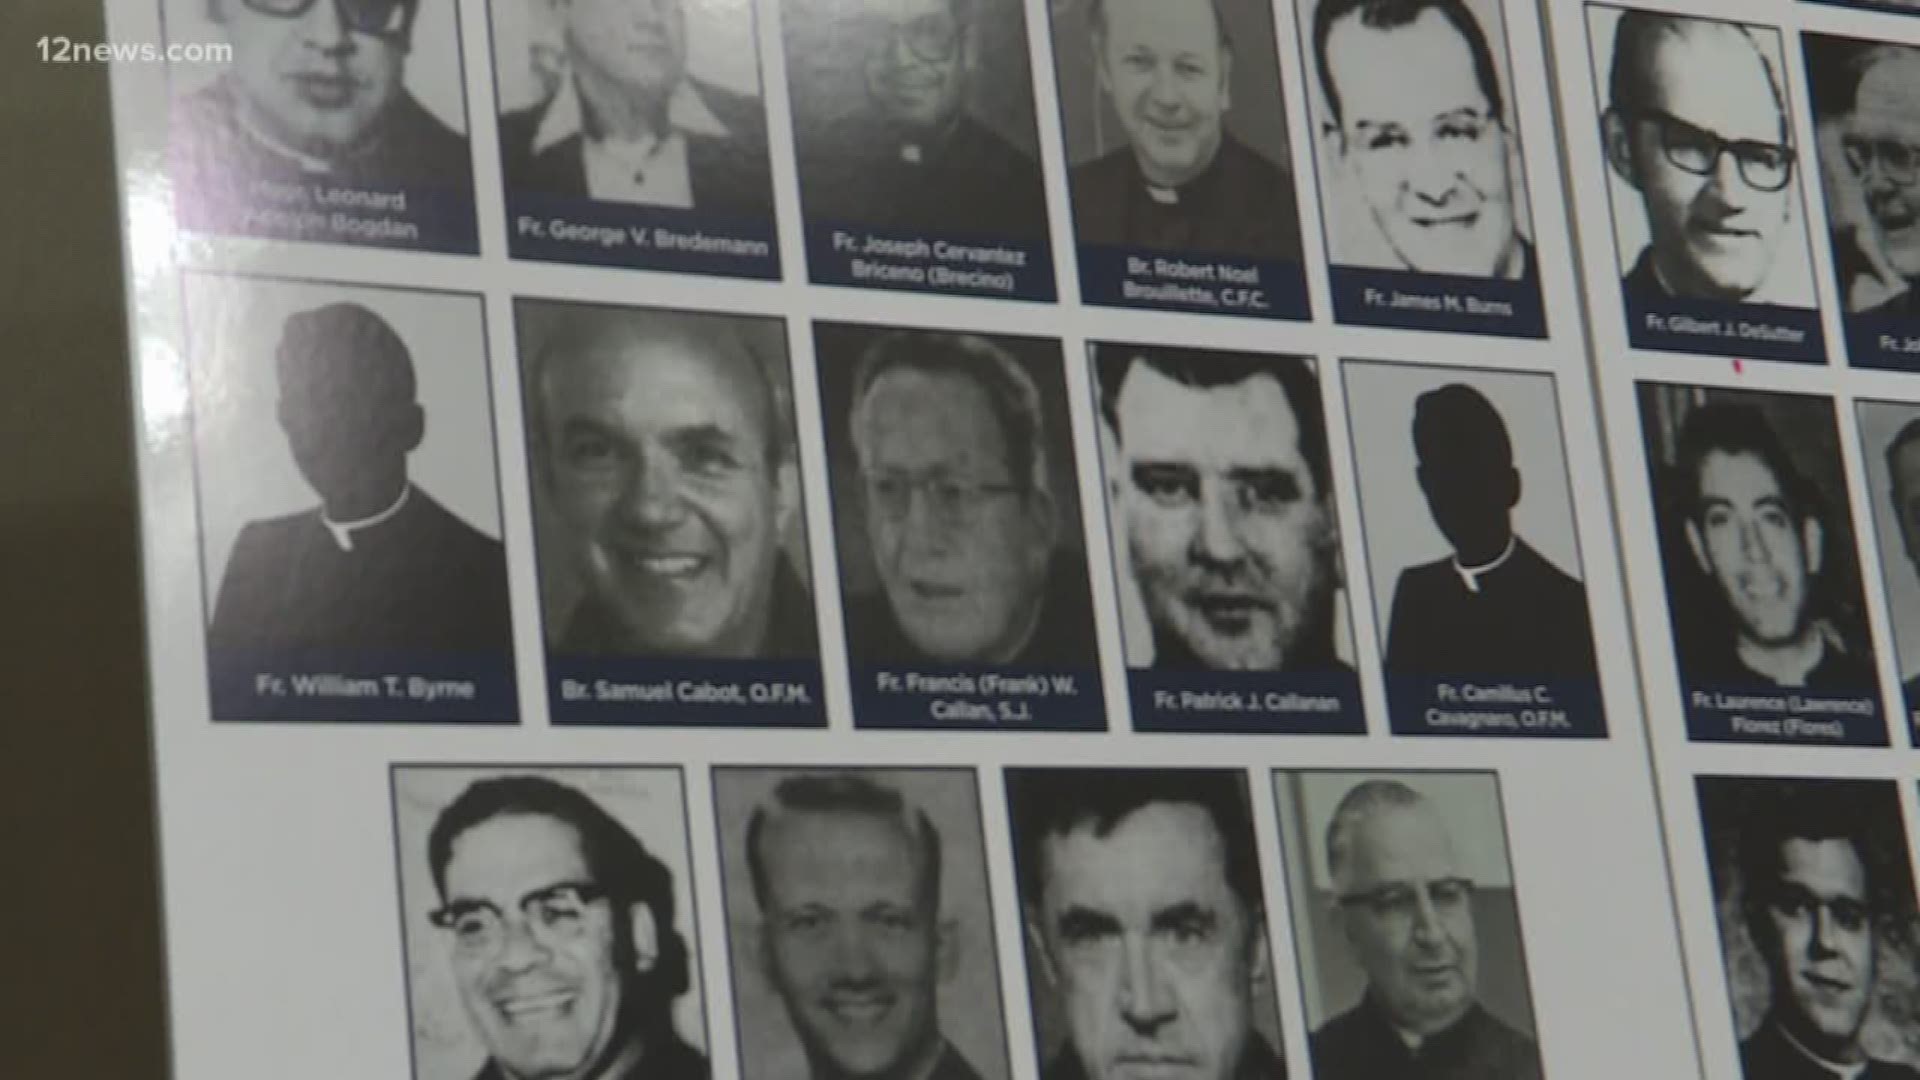 Firm releases report naming 109 clerics accused of sex abuse in Diocese of Phoenix 12news